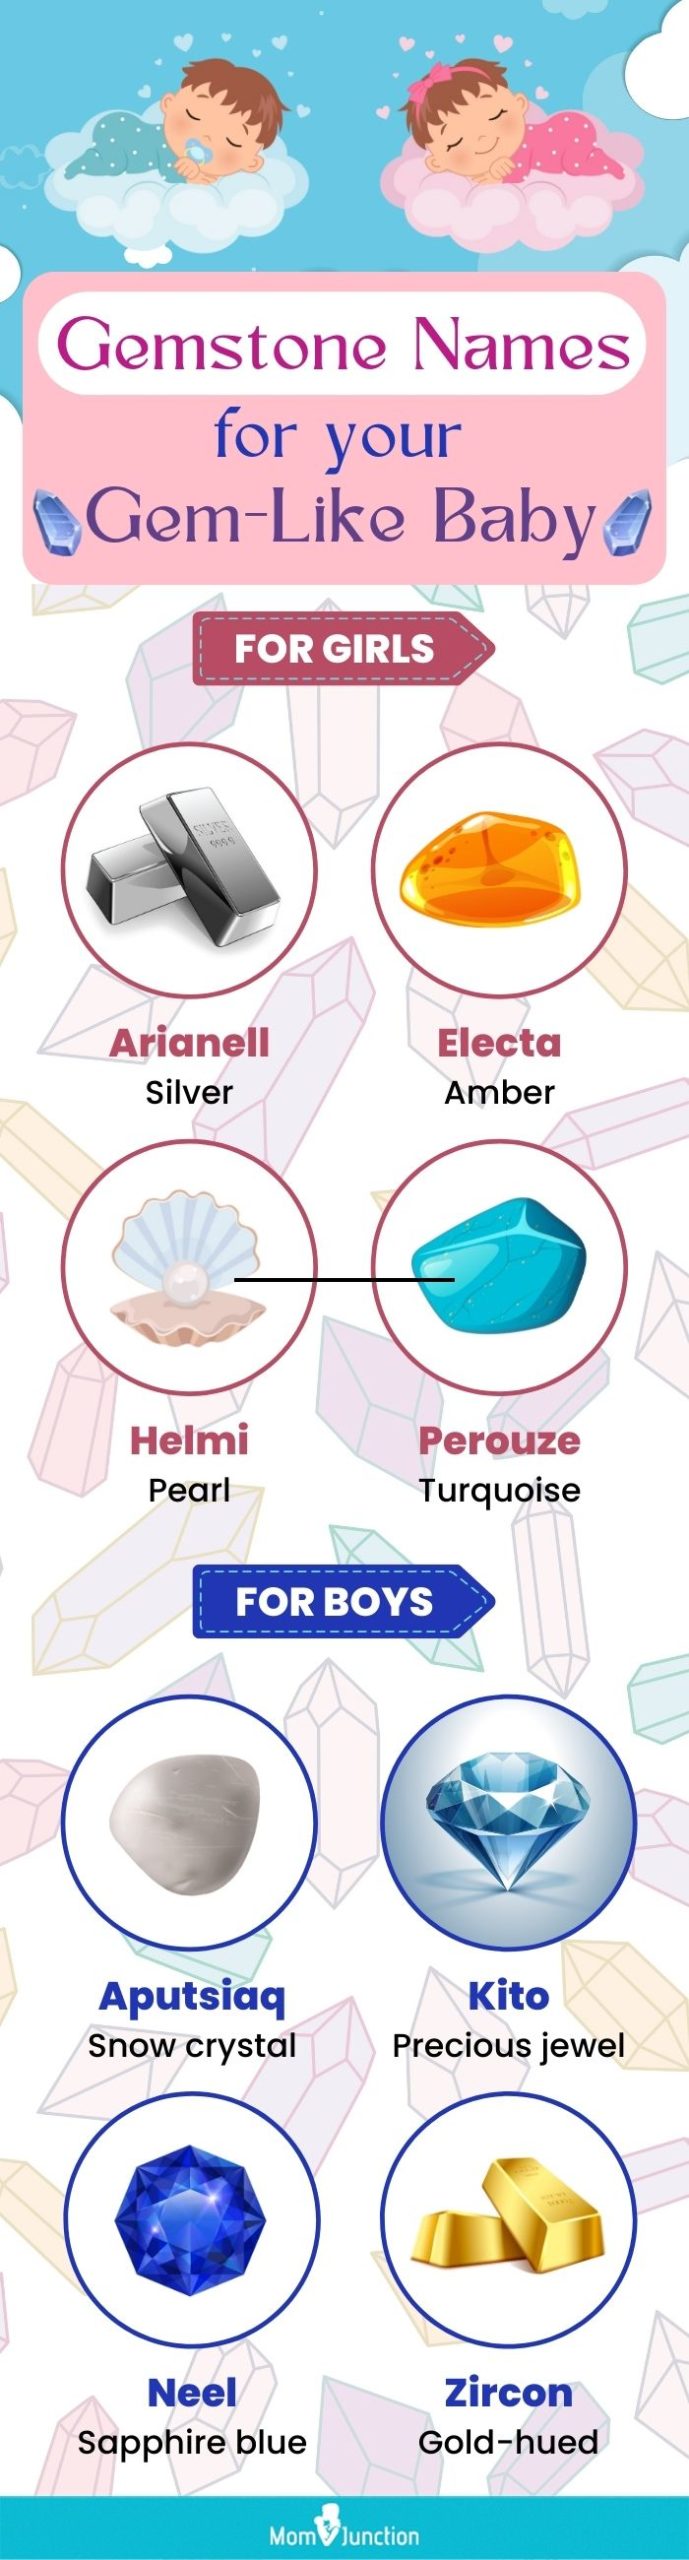 gemstone names for your gem like baby (infographic)